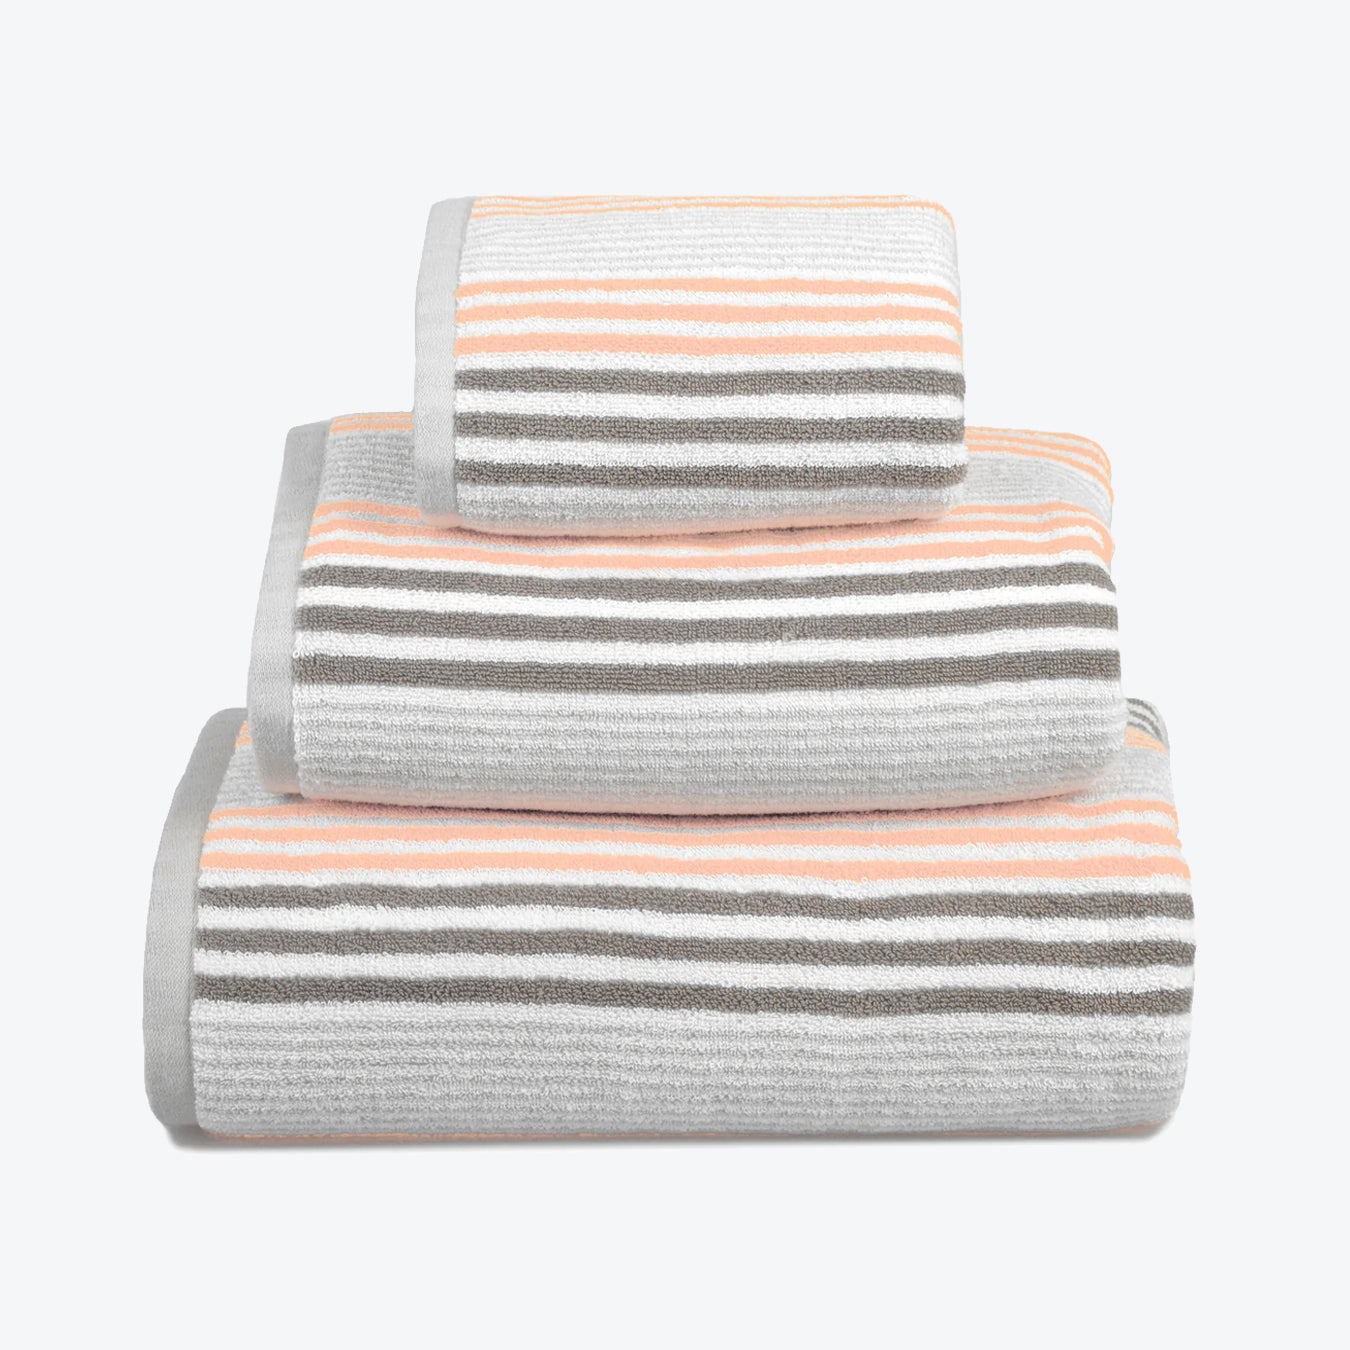 Grey/White/Blush Striped Bathroom Towels - Blush Pink Patterned Towels